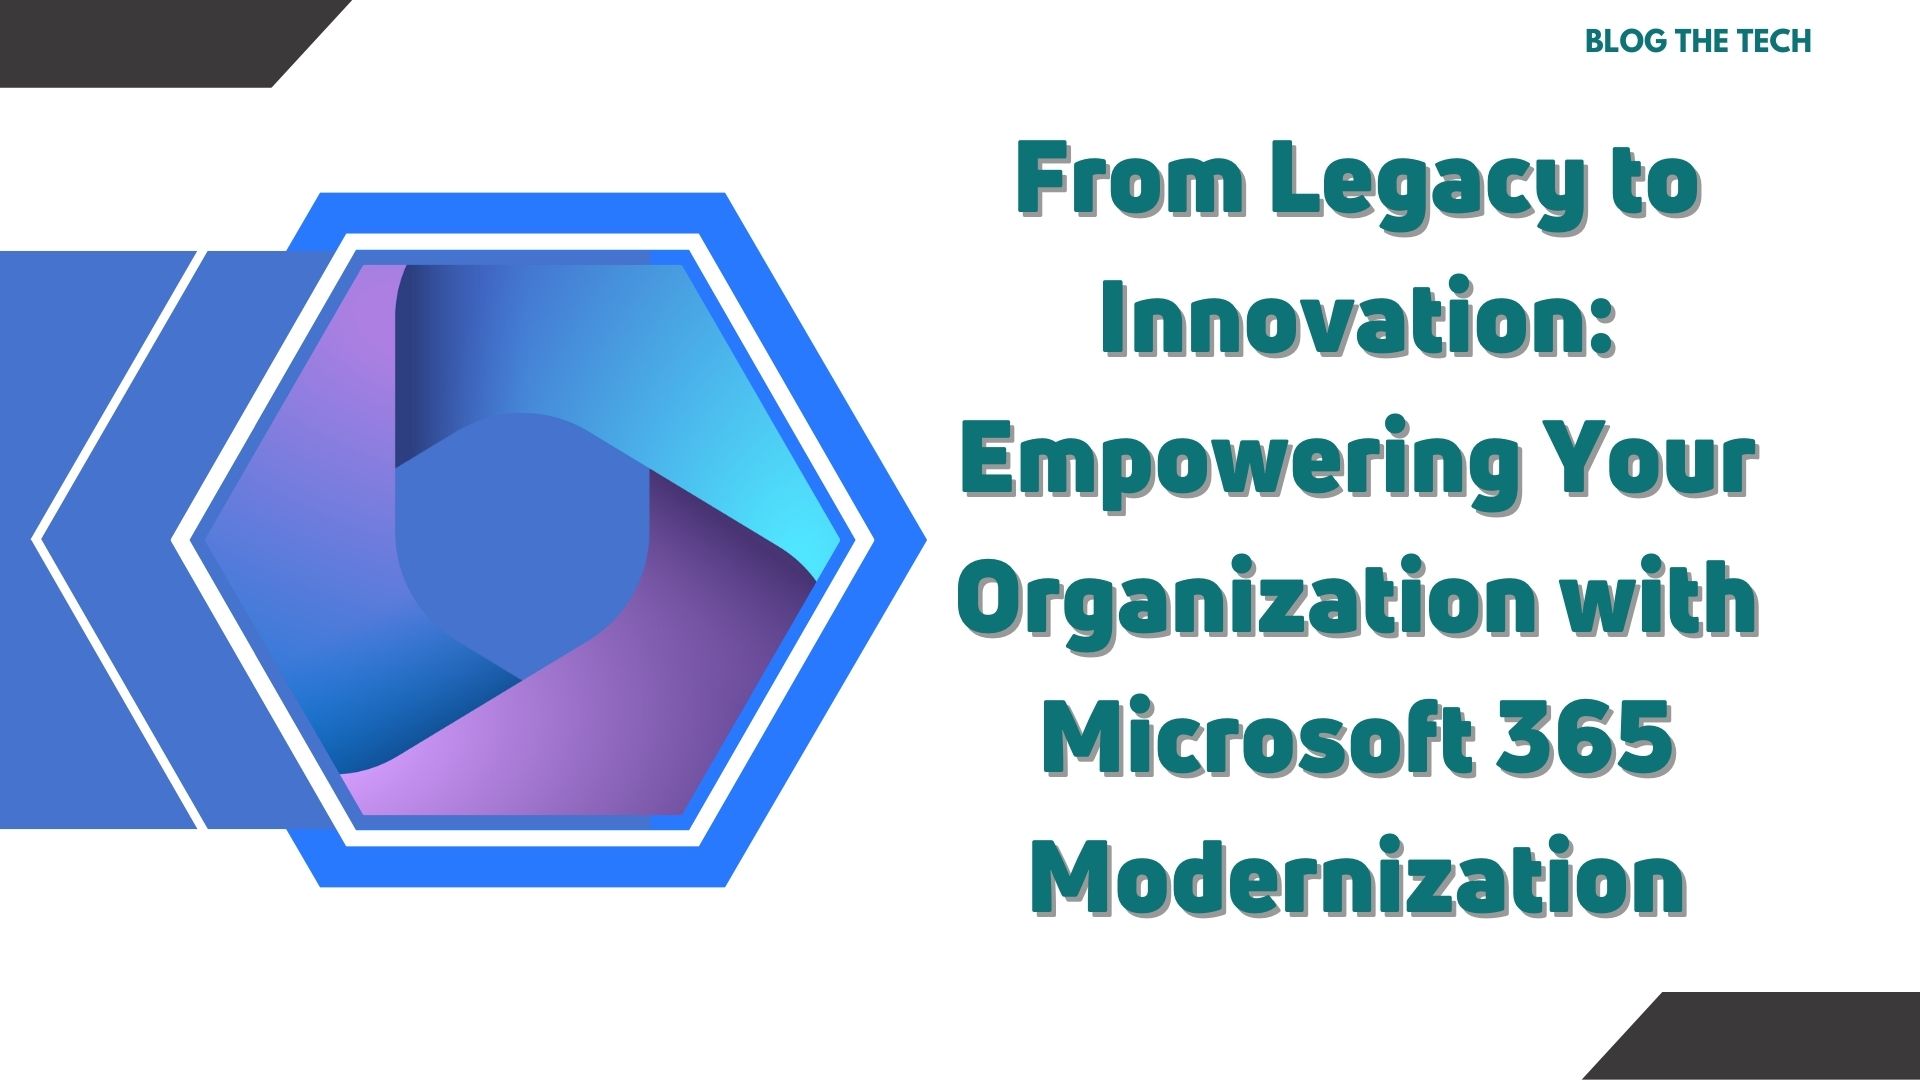 From Legacy to Innovation: Empowering Your Organization with Microsoft 365 Modernization